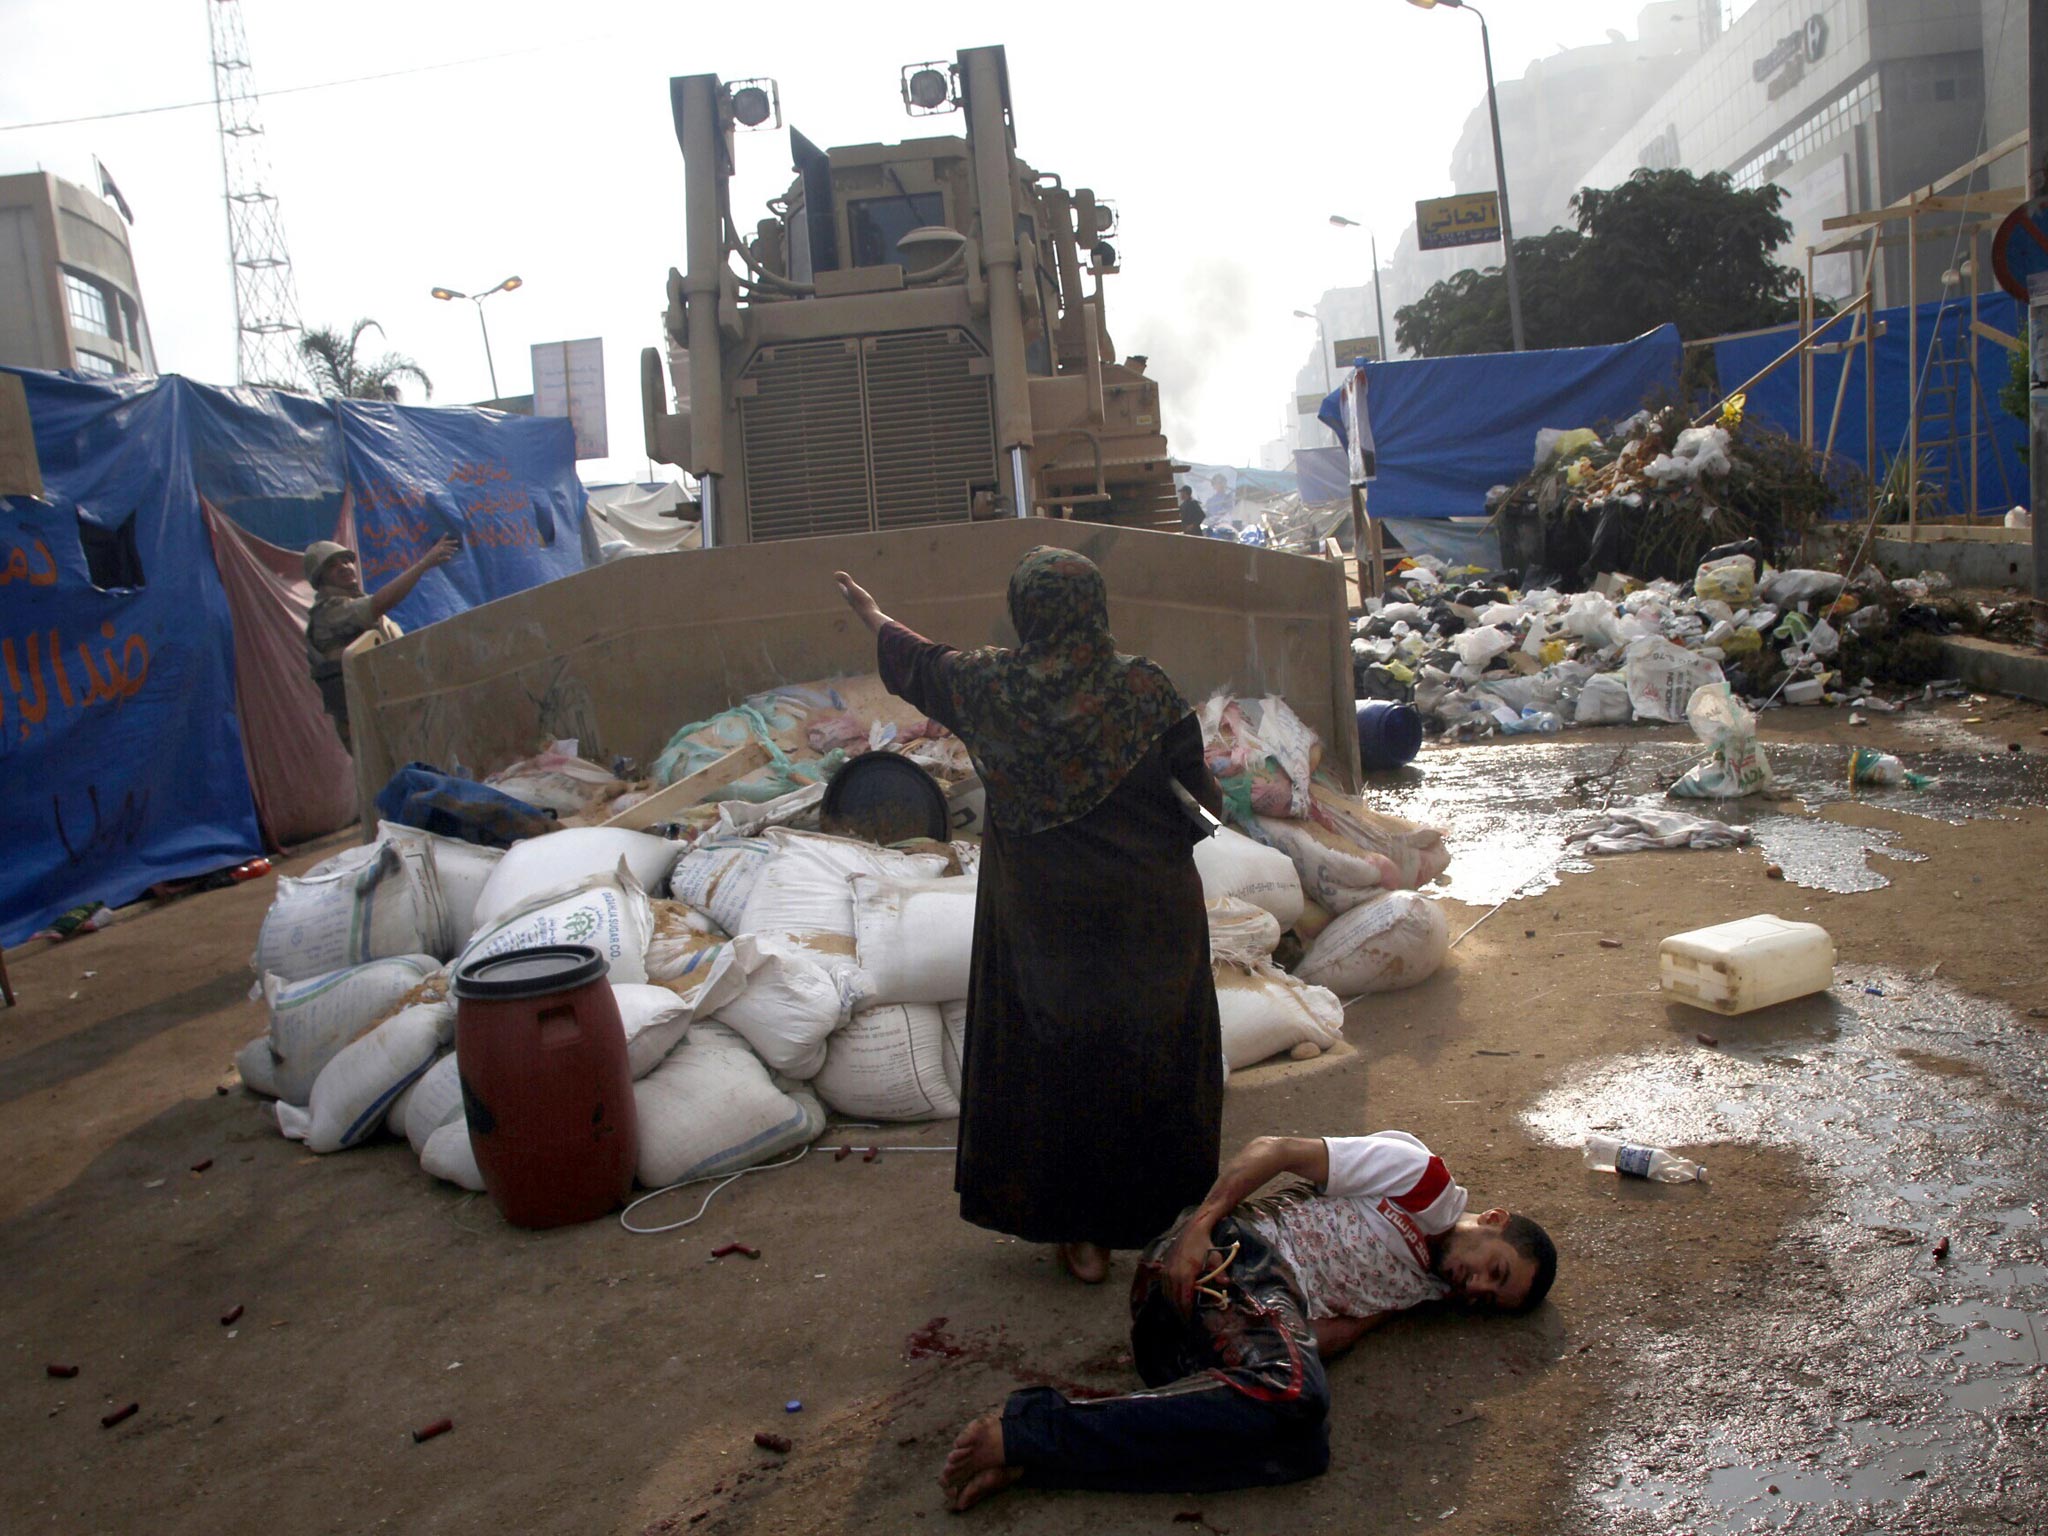 An Egyptian woman tries to stop a military bulldozer from hurting a wounded youth